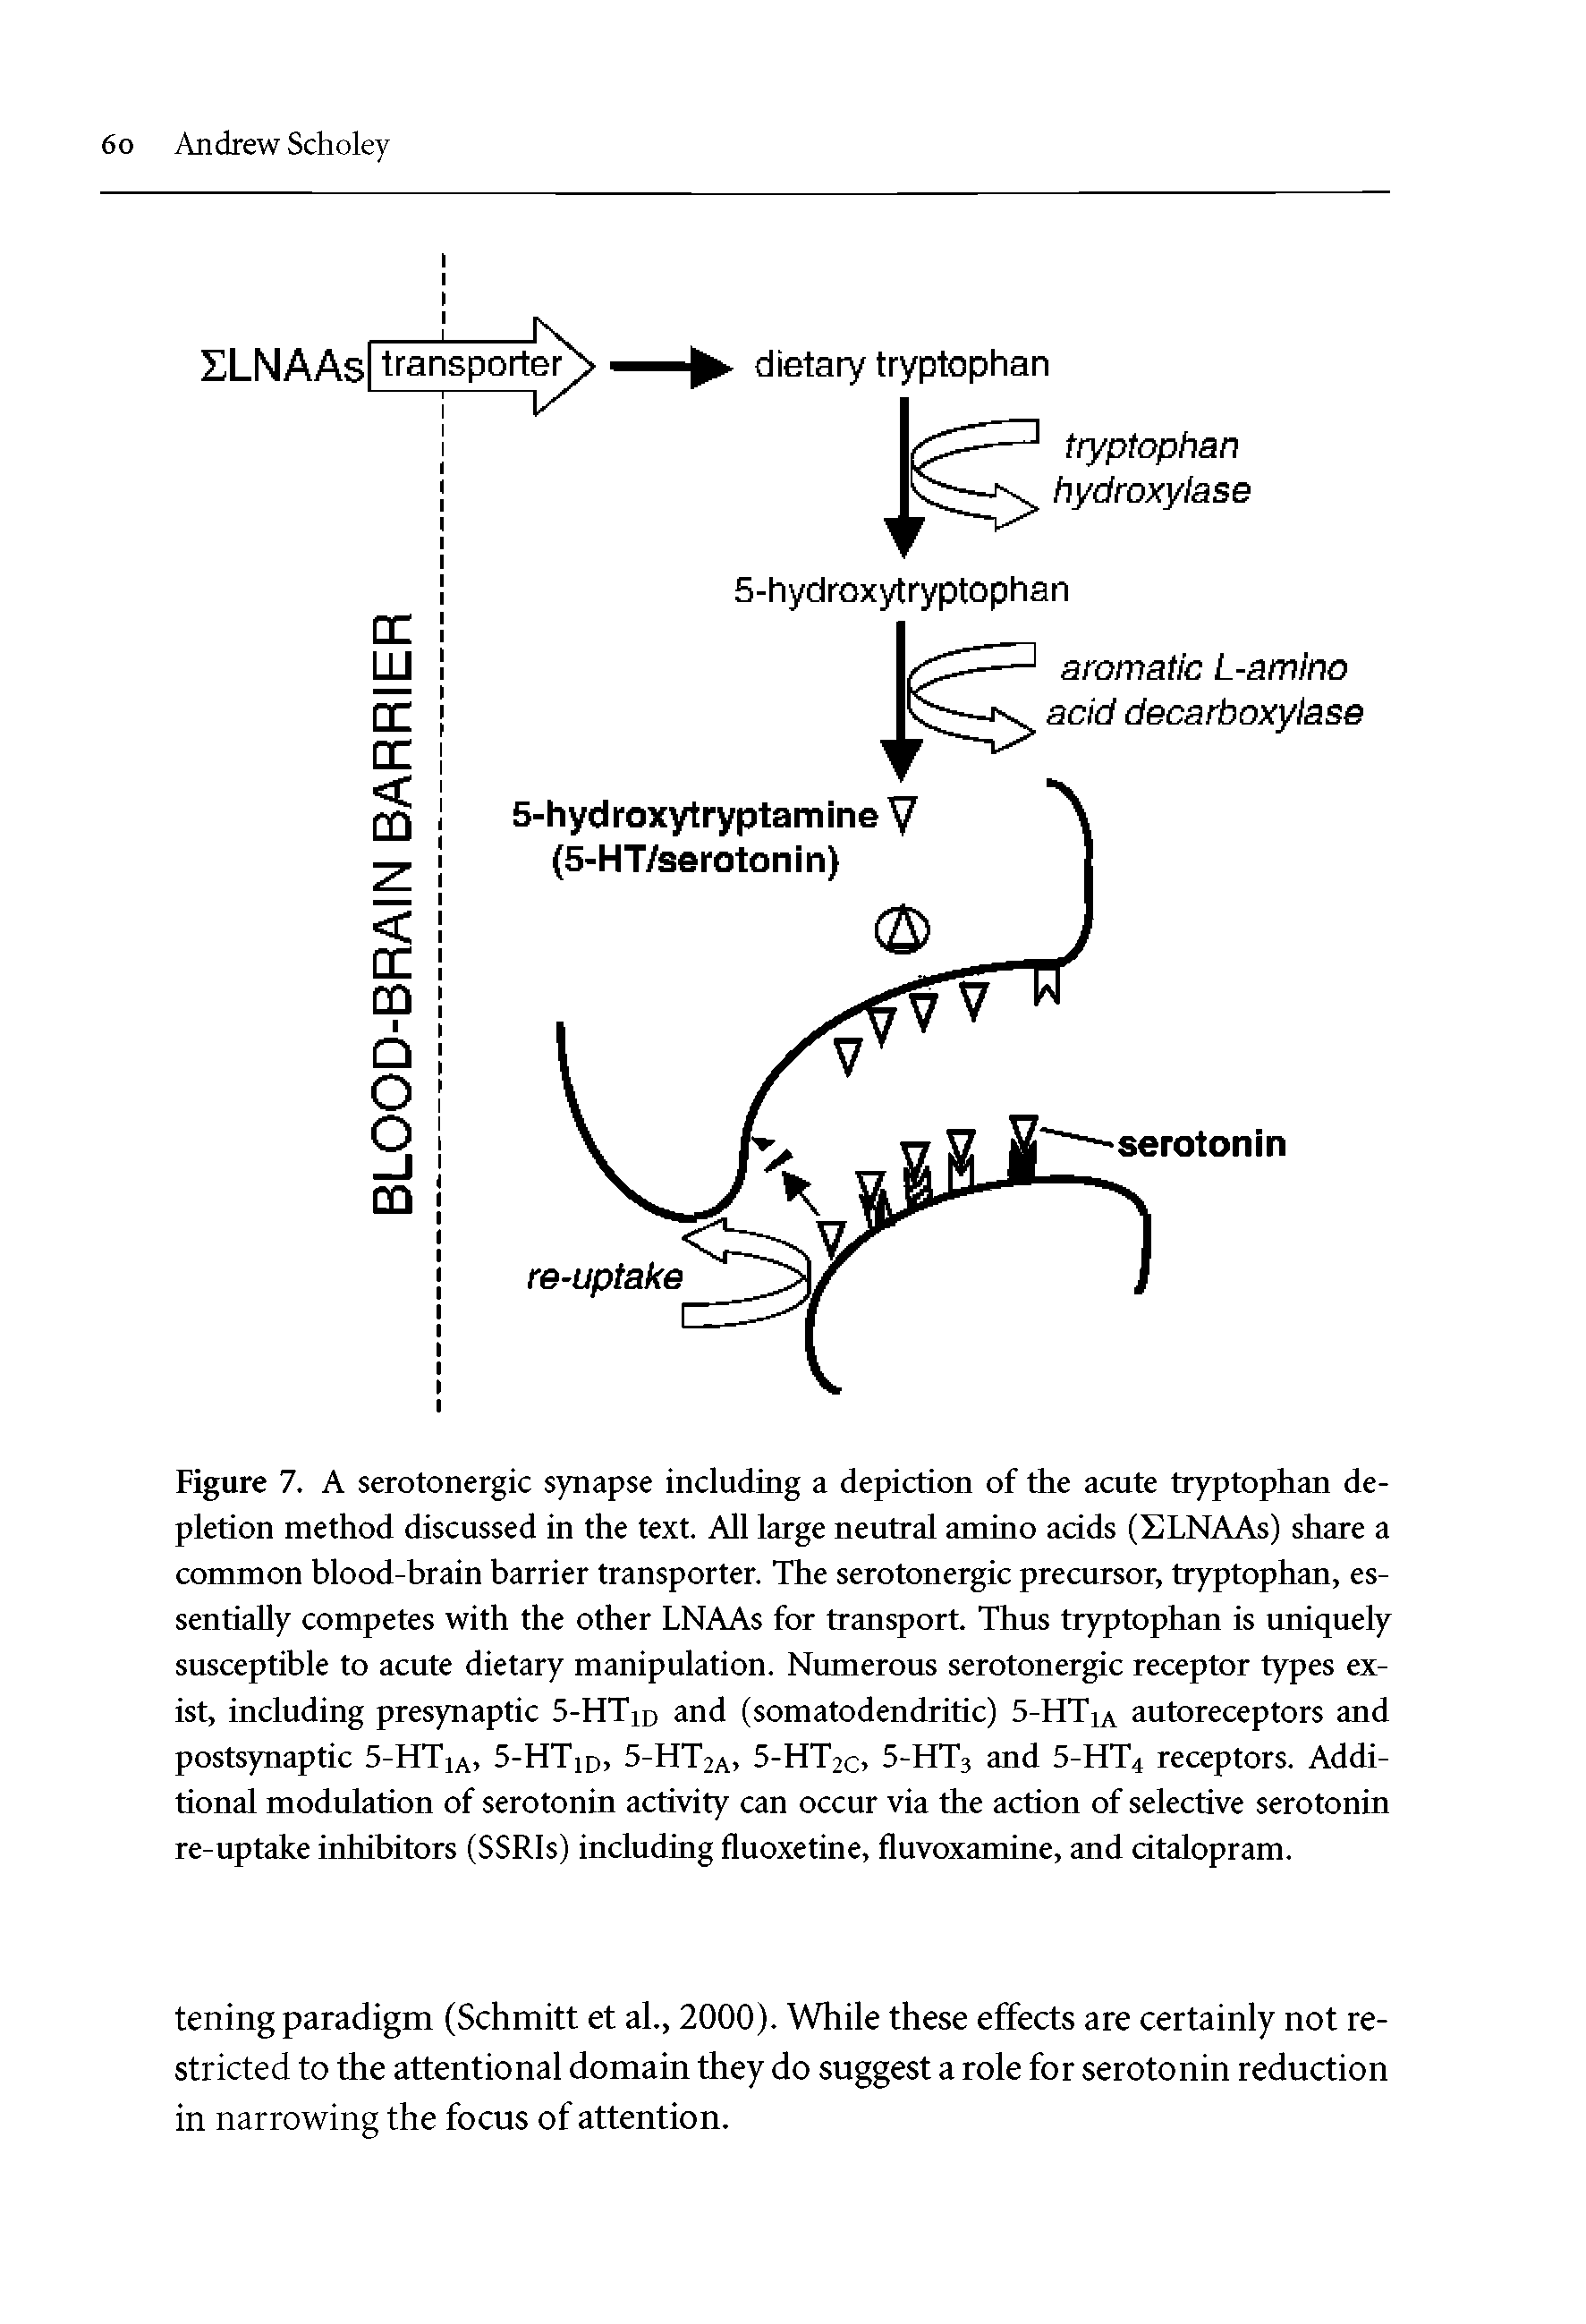 Figure 7. A serotonergic synapse including a depiction of the acute tryptophan depletion method discussed in the text. All large neutral amino acids (SLNAAs) share a common blood-brain barrier transporter. The serotonergic precursor, tryptophan, essentially competes with the other LNAAs for transport. Thus tryptophan is uniquely susceptible to acute dietary manipulation. Numerous serotonergic receptor types exist, including presynaptic S-HTm and (somatodendritic) 5-HTia autoreceptors and postsynaptic 5-HTia, 5-HTid, 5-HT2a 5-HT2c 5-HT3 and 5-HT4 receptors. Additional modulation of serotonin activity can occur via the action of selective serotonin re-uptake inhibitors (SSRls) including fluoxetine, fluvoxamine, and citalopram.